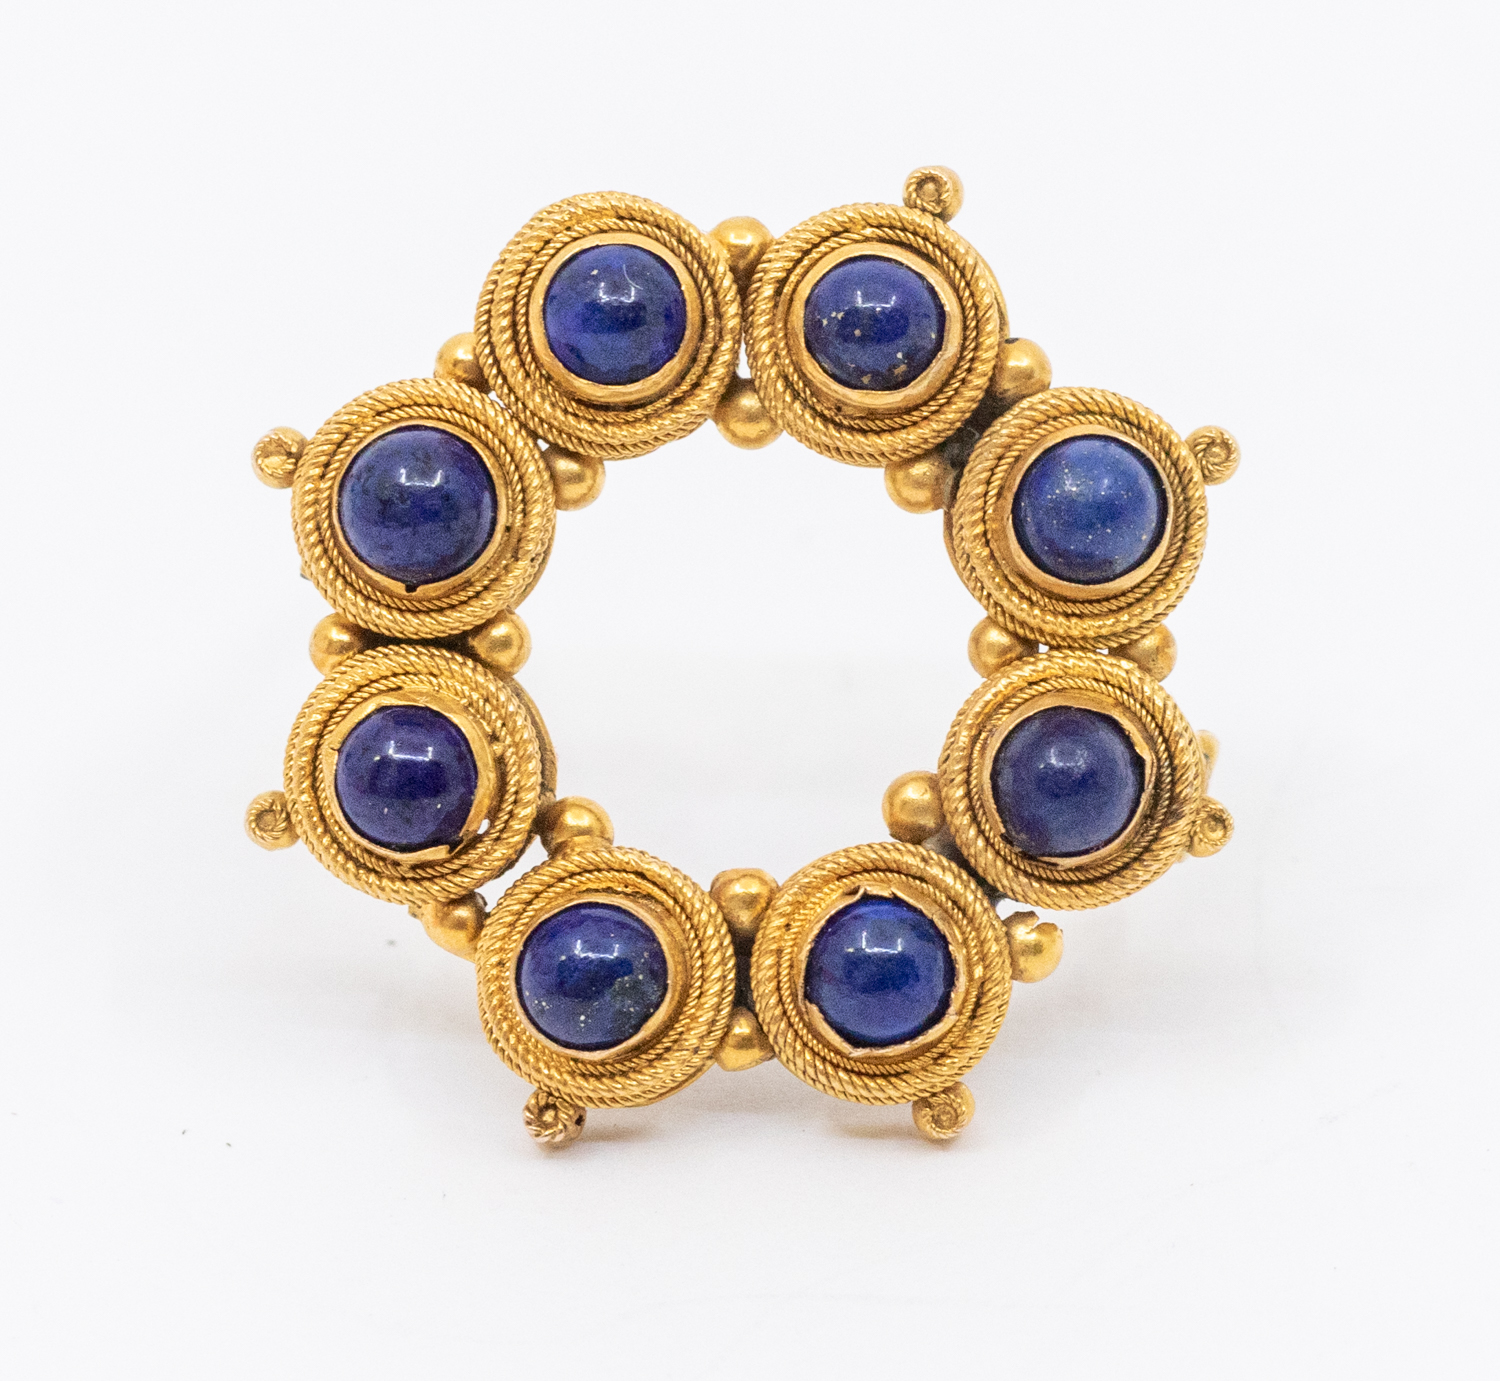 An early 20th century lapis lazuli and gold brooch, comprising a circular design set with eight